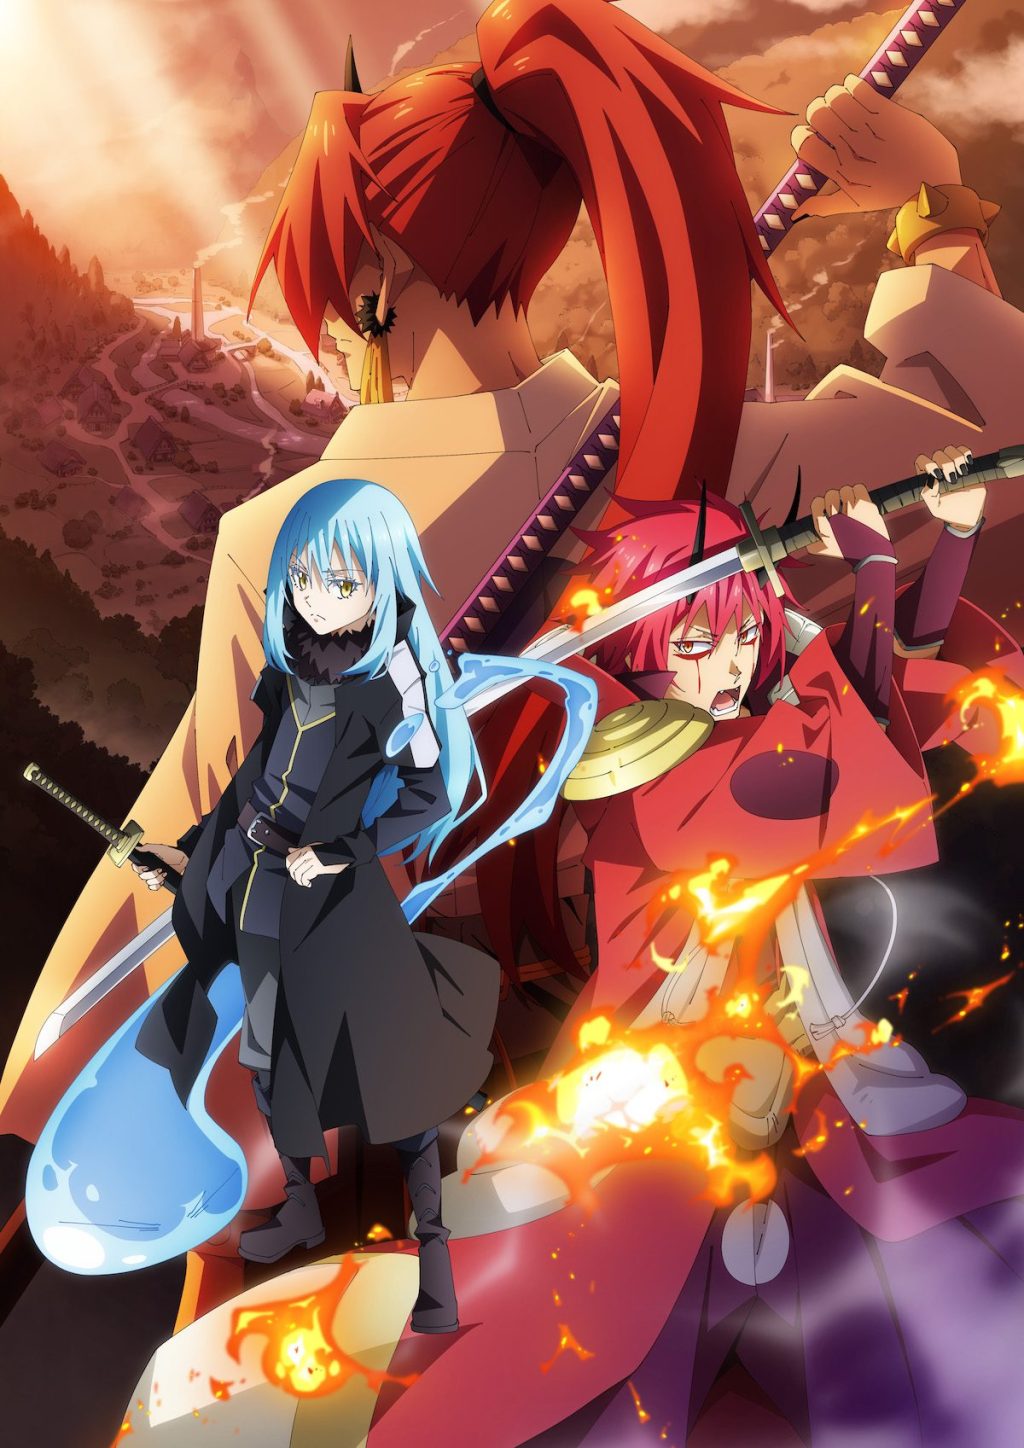 That Time I got reincarnated as a slime movie